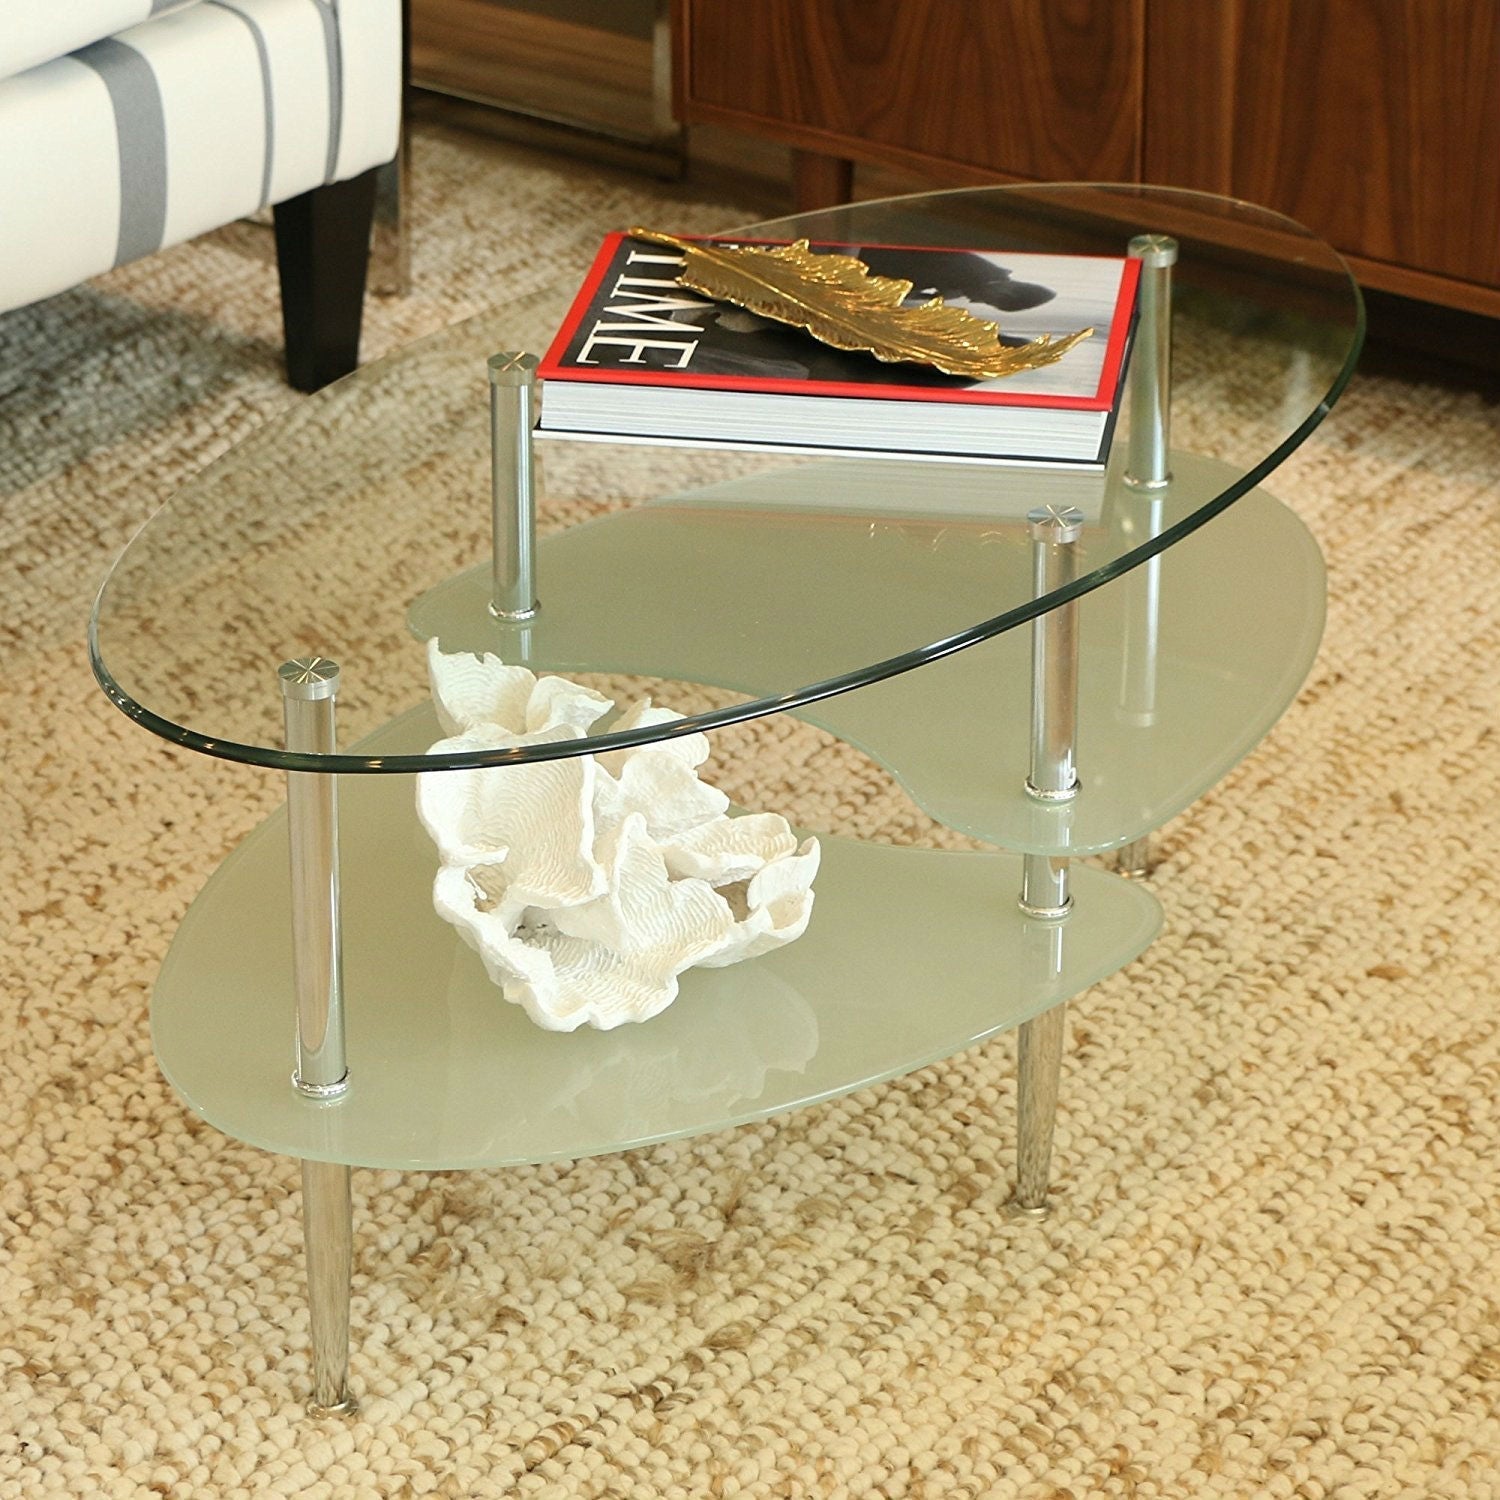 Living Room > Coffee Tables - Modern Oval Glass Coffee Table With Chrome Metal Legs